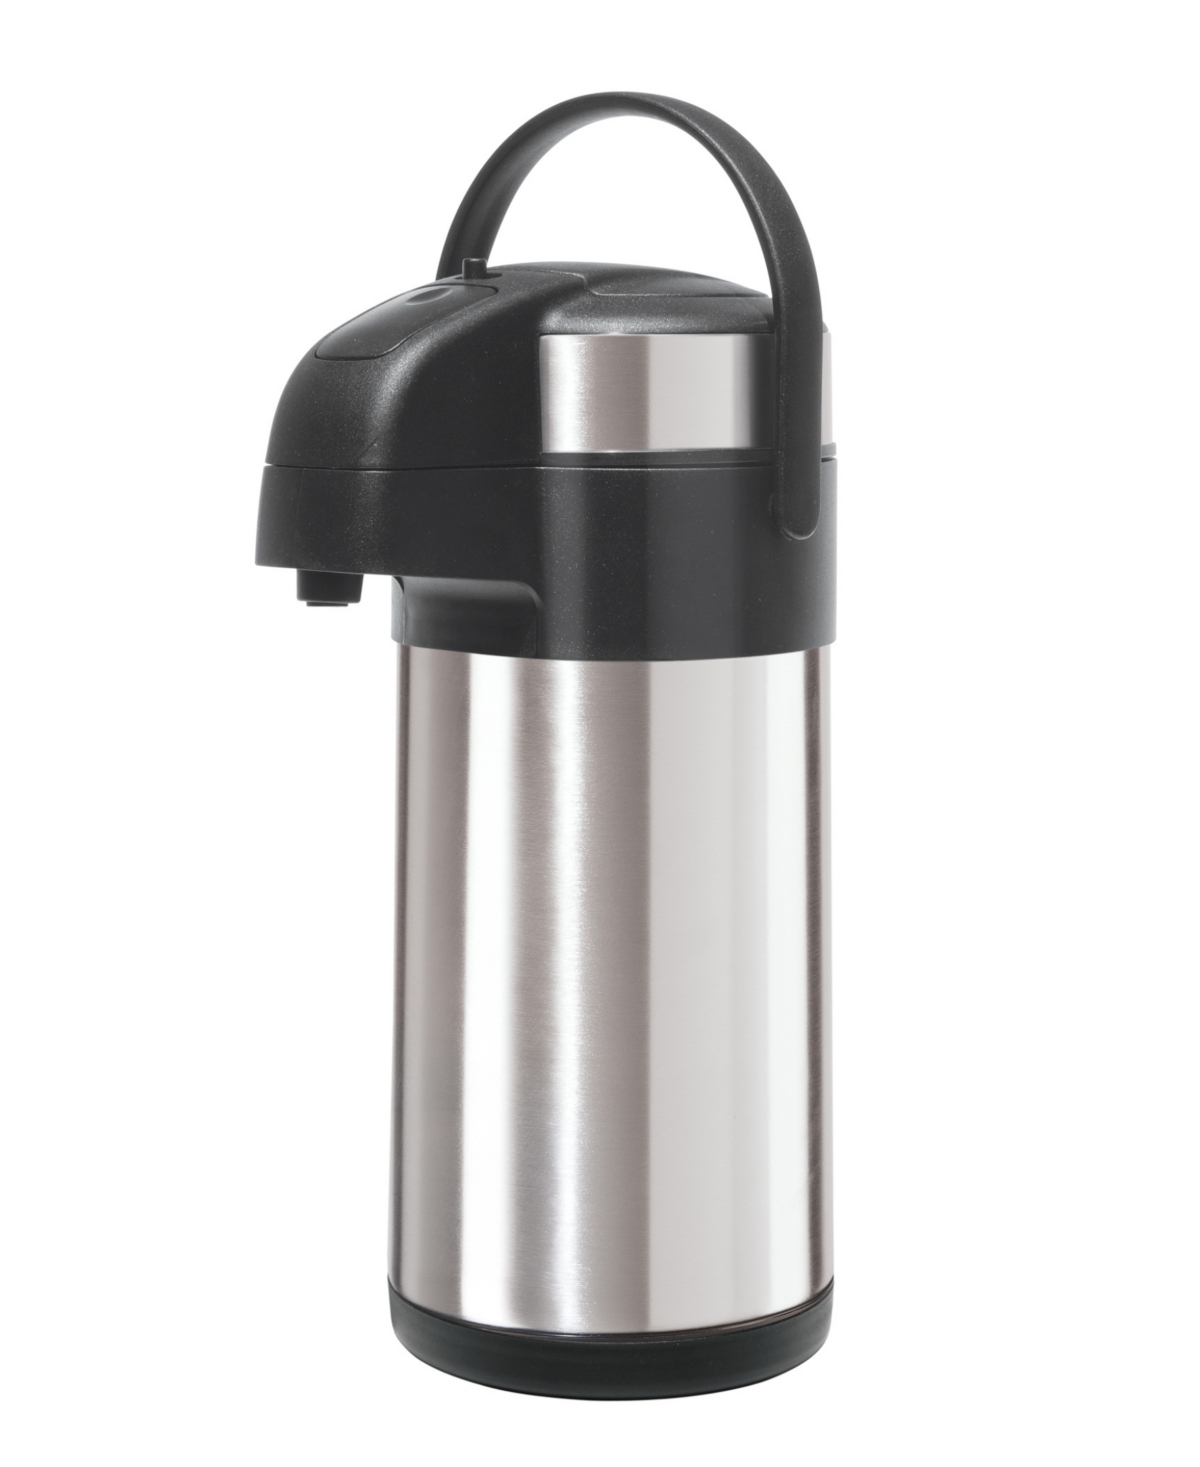 Oggi 3 Litre Air King Carafe In Stainless Steel